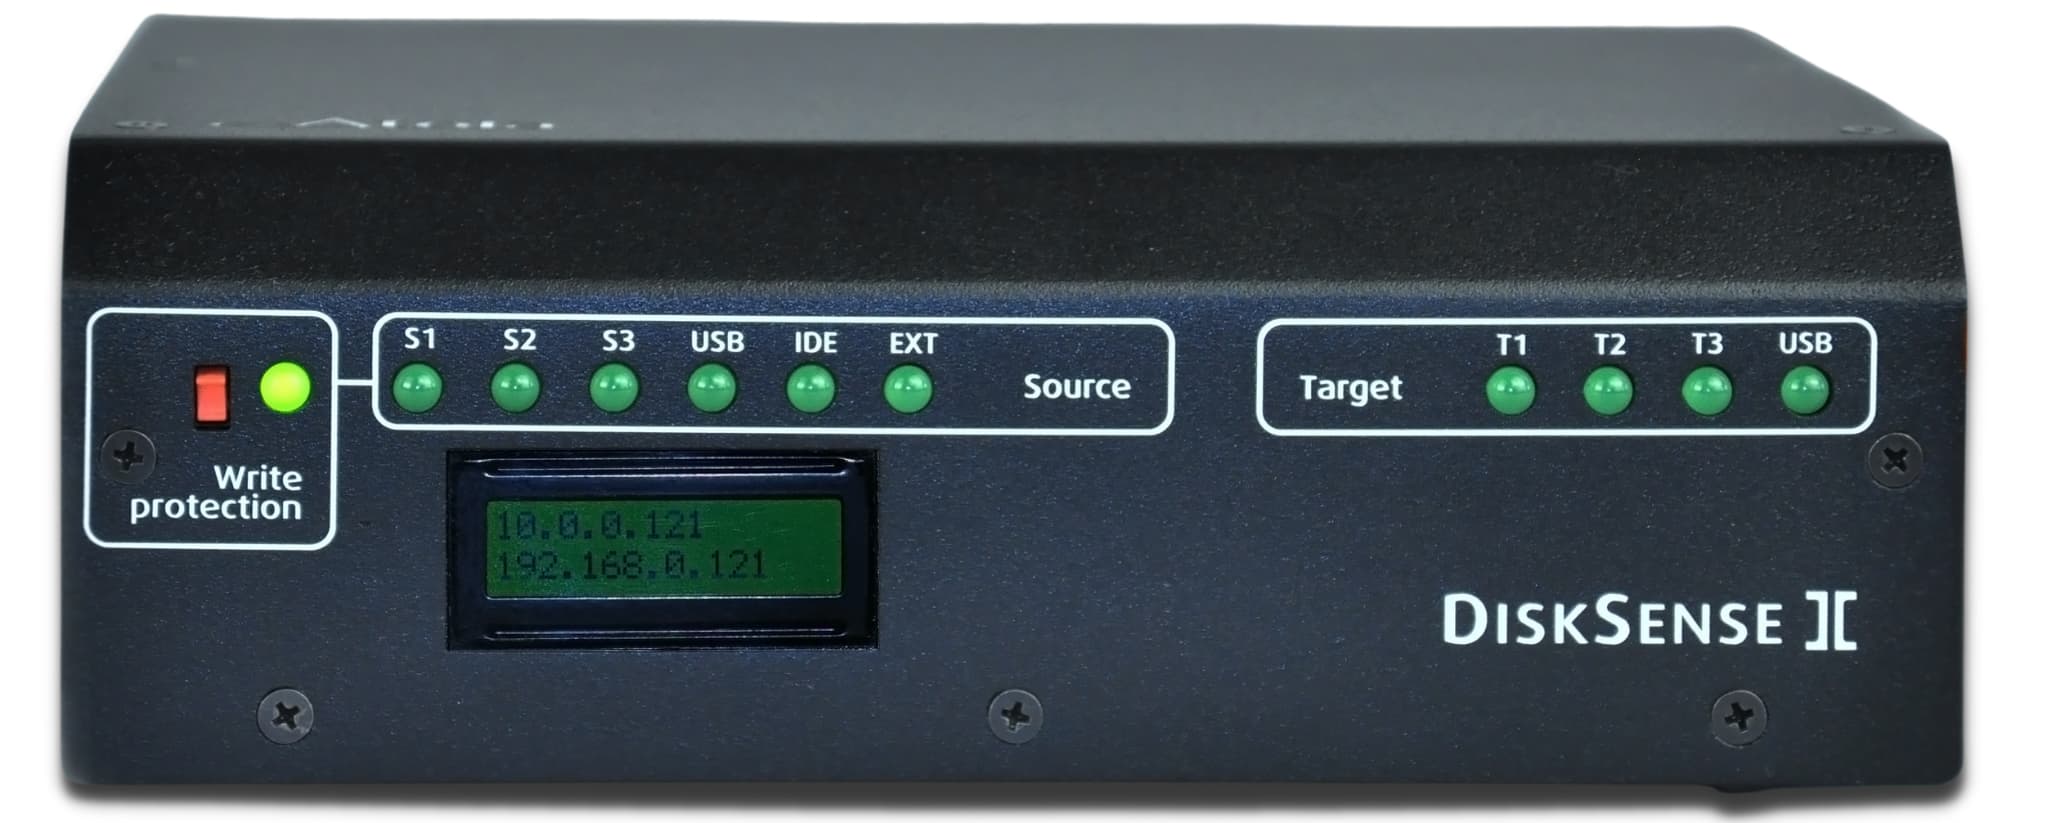 The IP display on the front panel of DiskSense 2